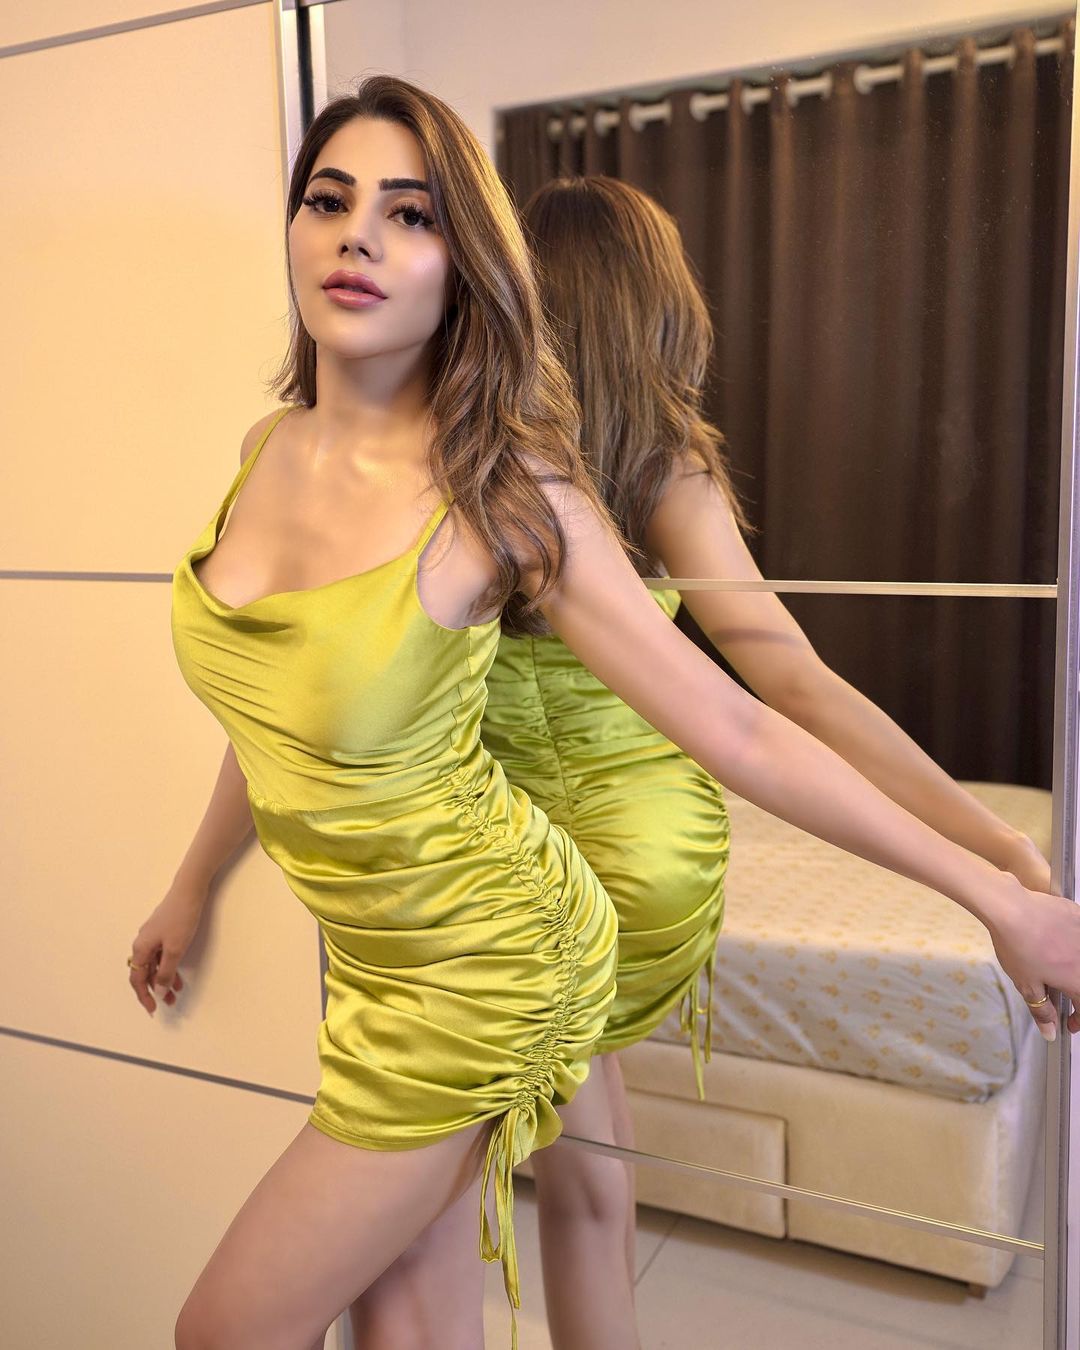 Nikki Tamboli looks hot in the green ruched dress